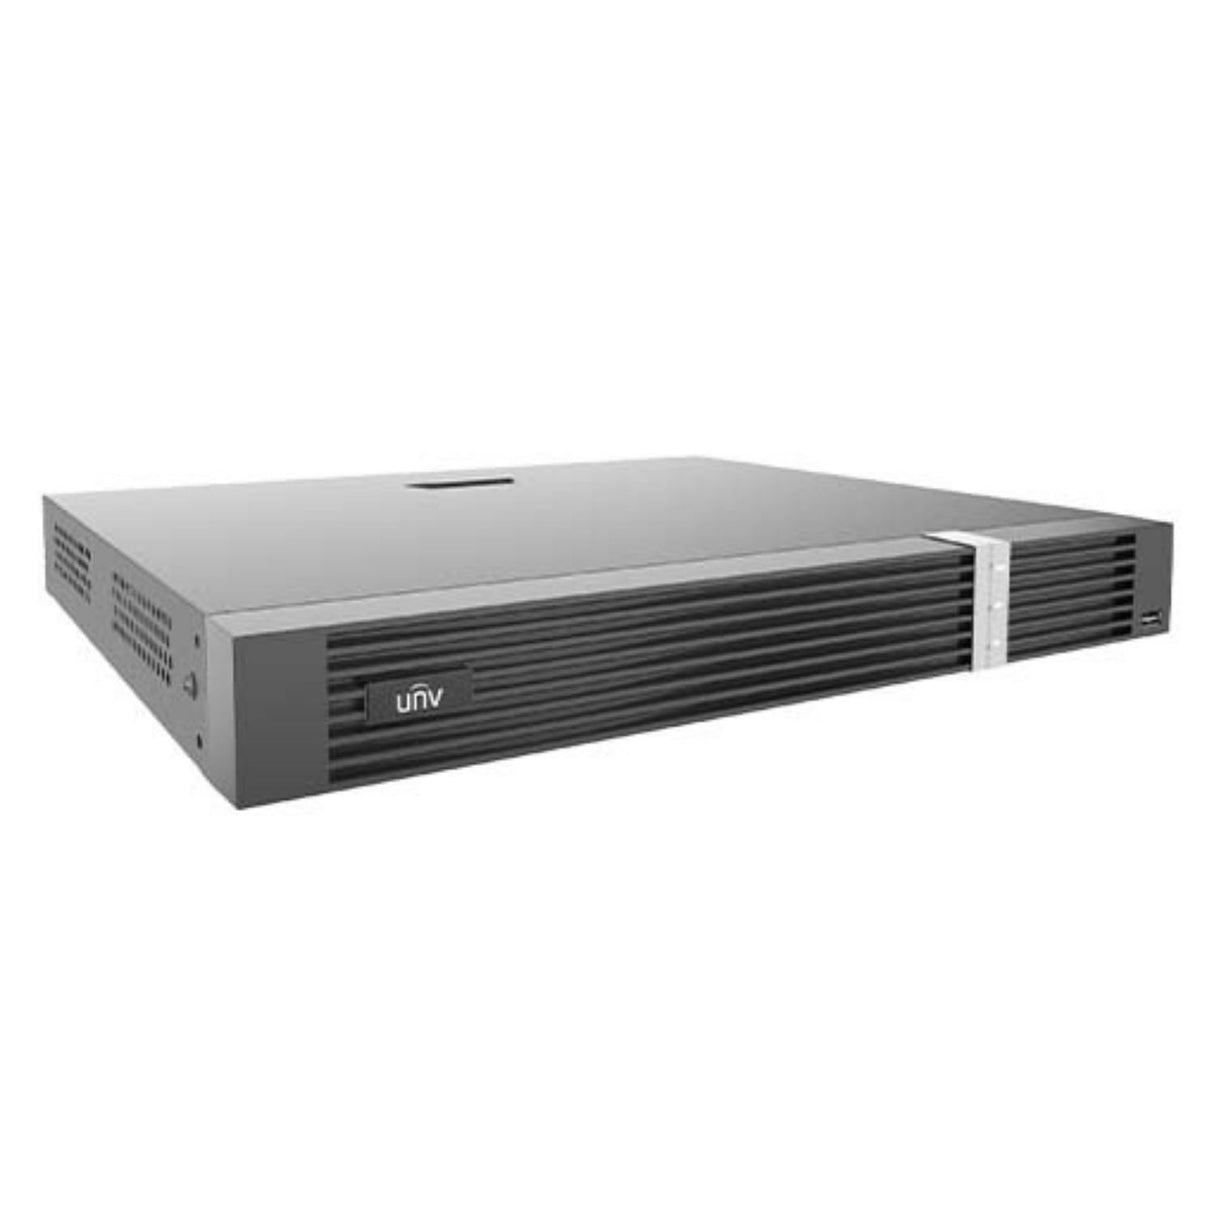 Uniview 16CH Network Video Recorder: upto 12MP, 160MBPS INPUT, 2-SATA HDD, Prime Series - NVR302-16E2-P16-IQ